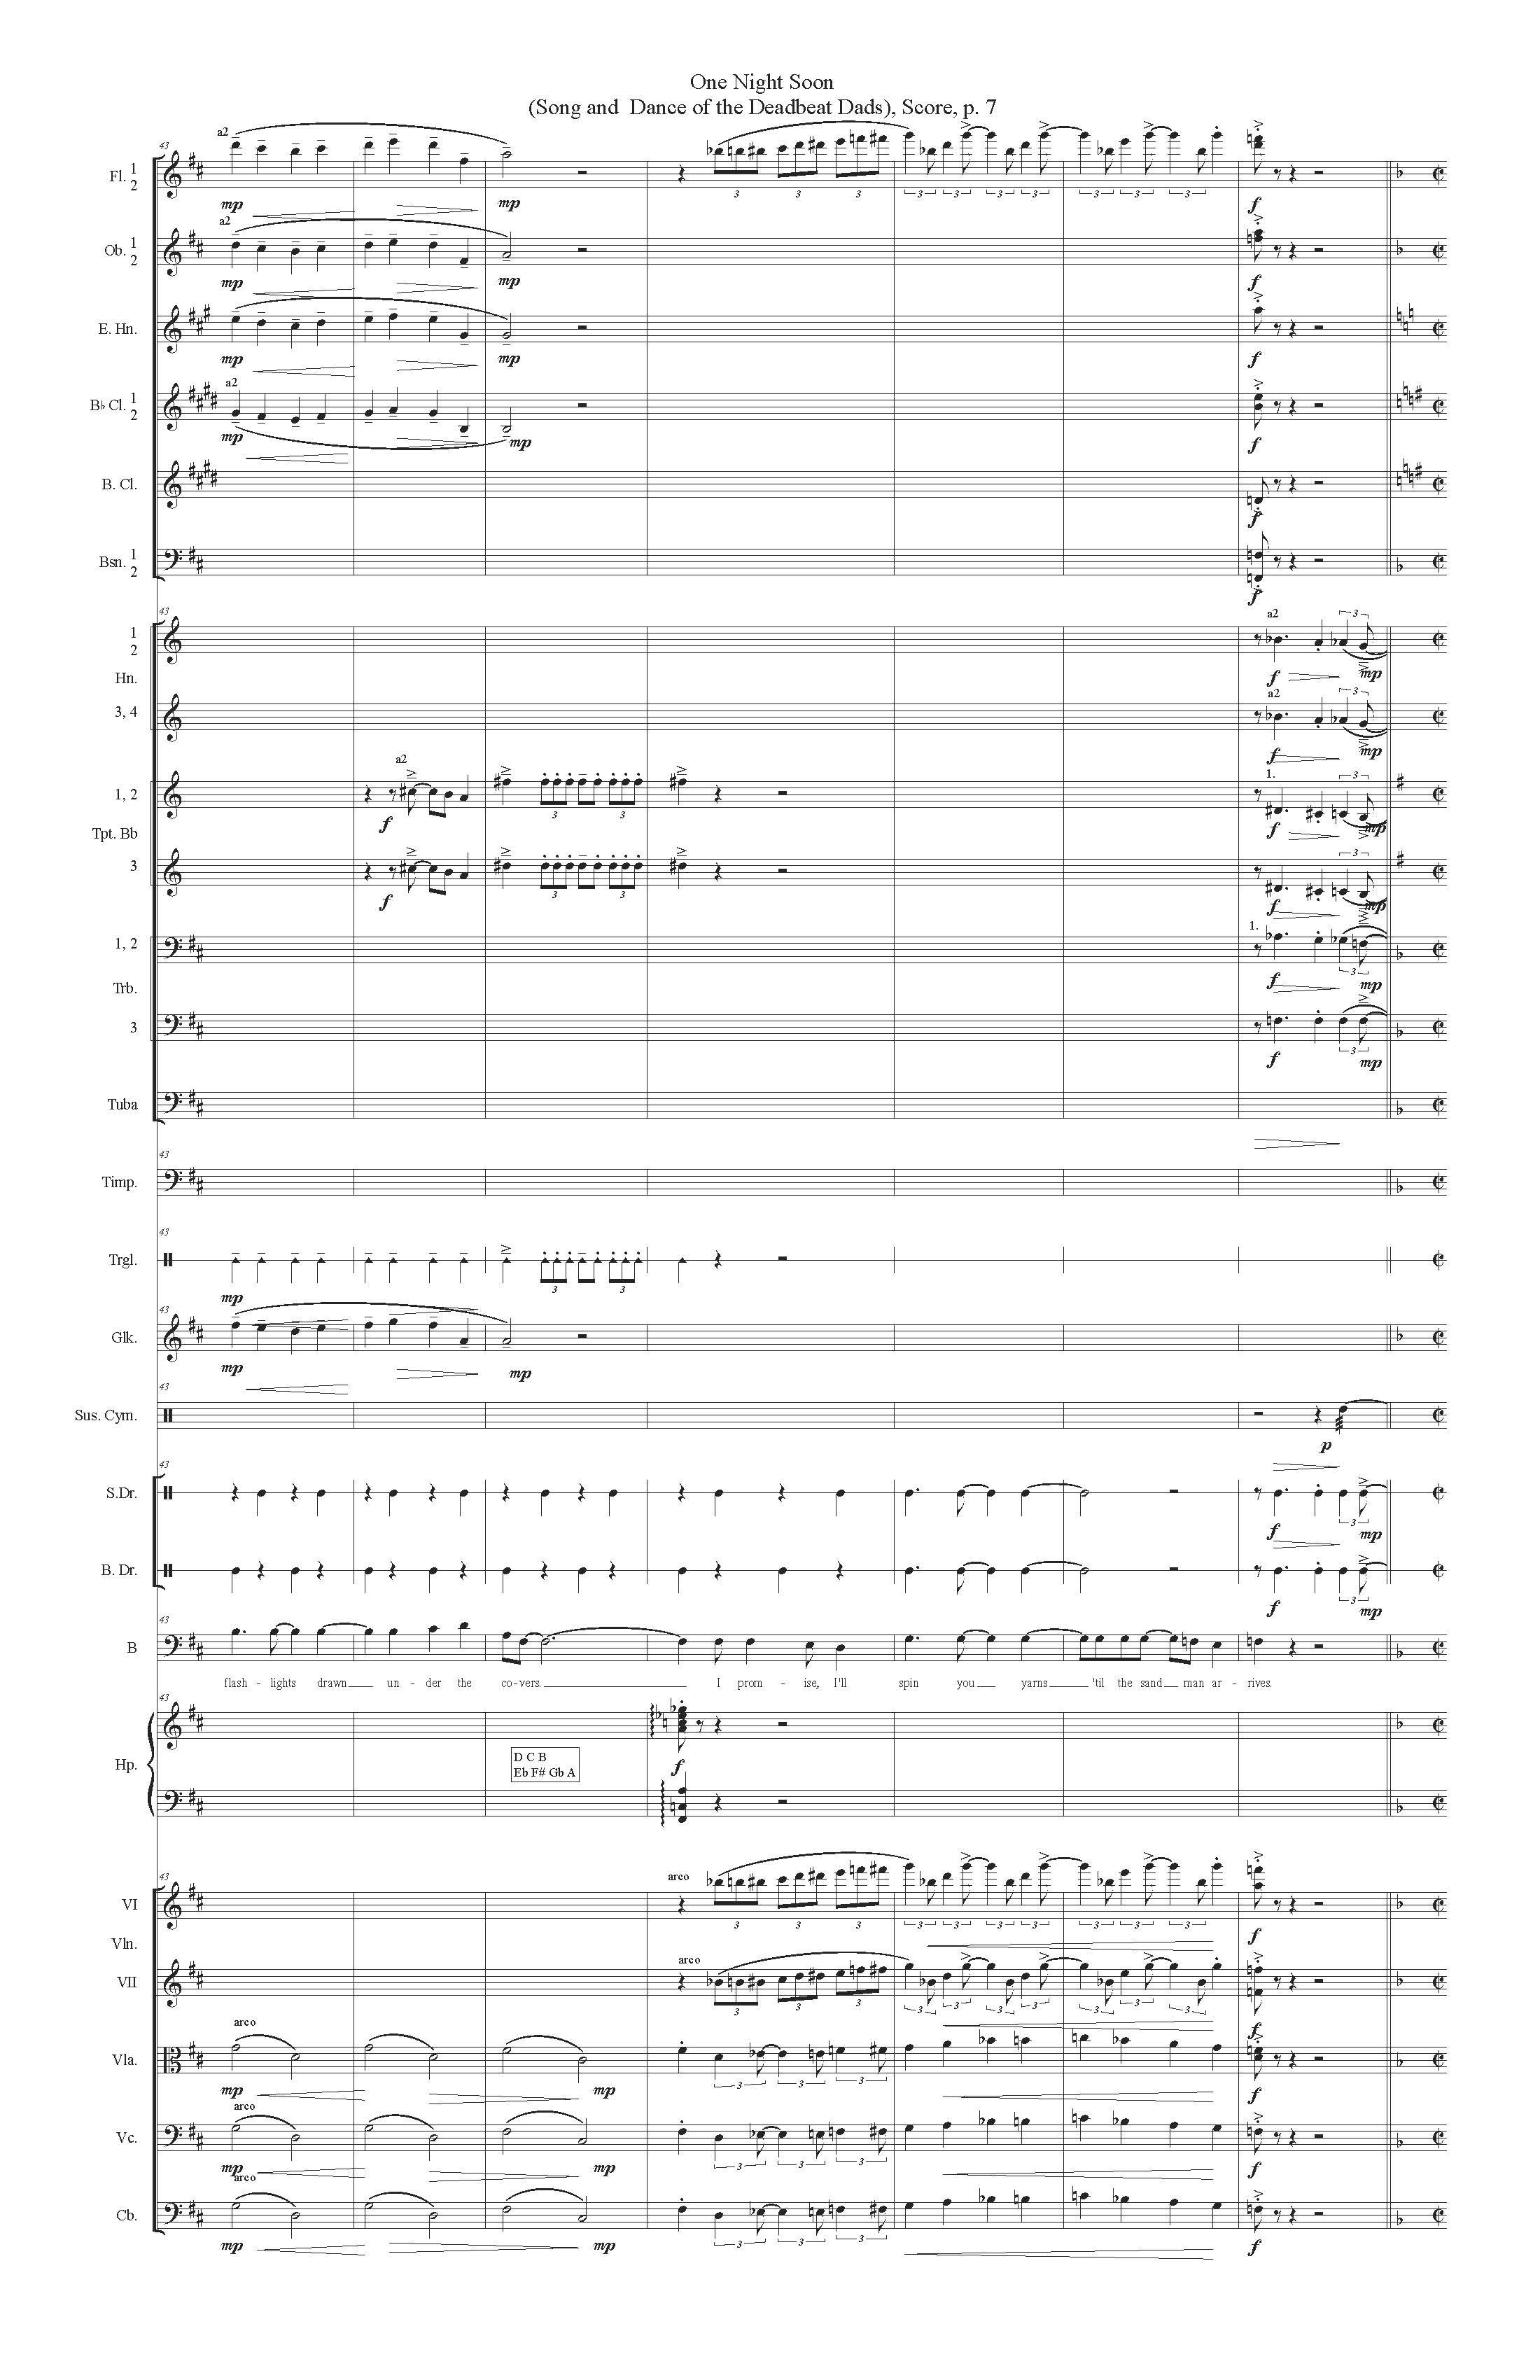 ONE NIGHT SOON ORCH - Score_Page_07.jpg